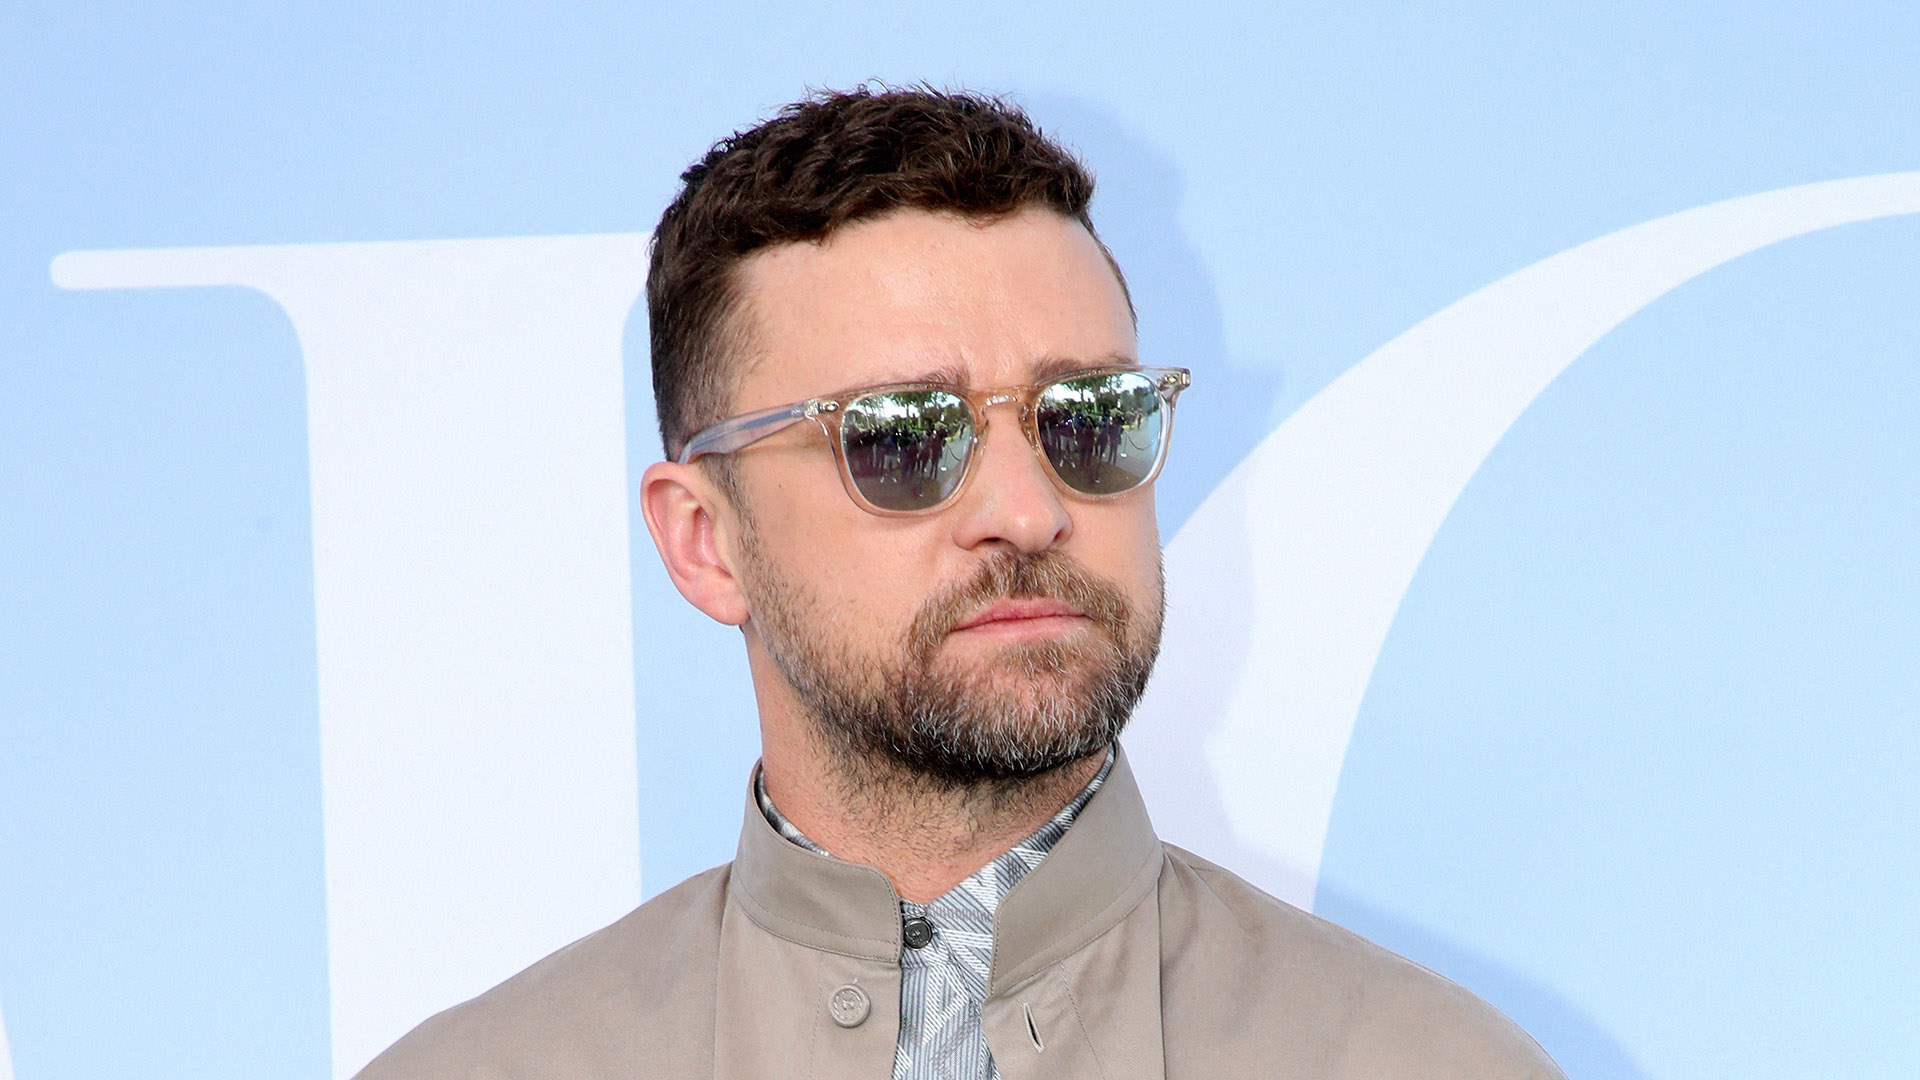 After All the Cheating Drama, What's With Justin Timberlake Now?